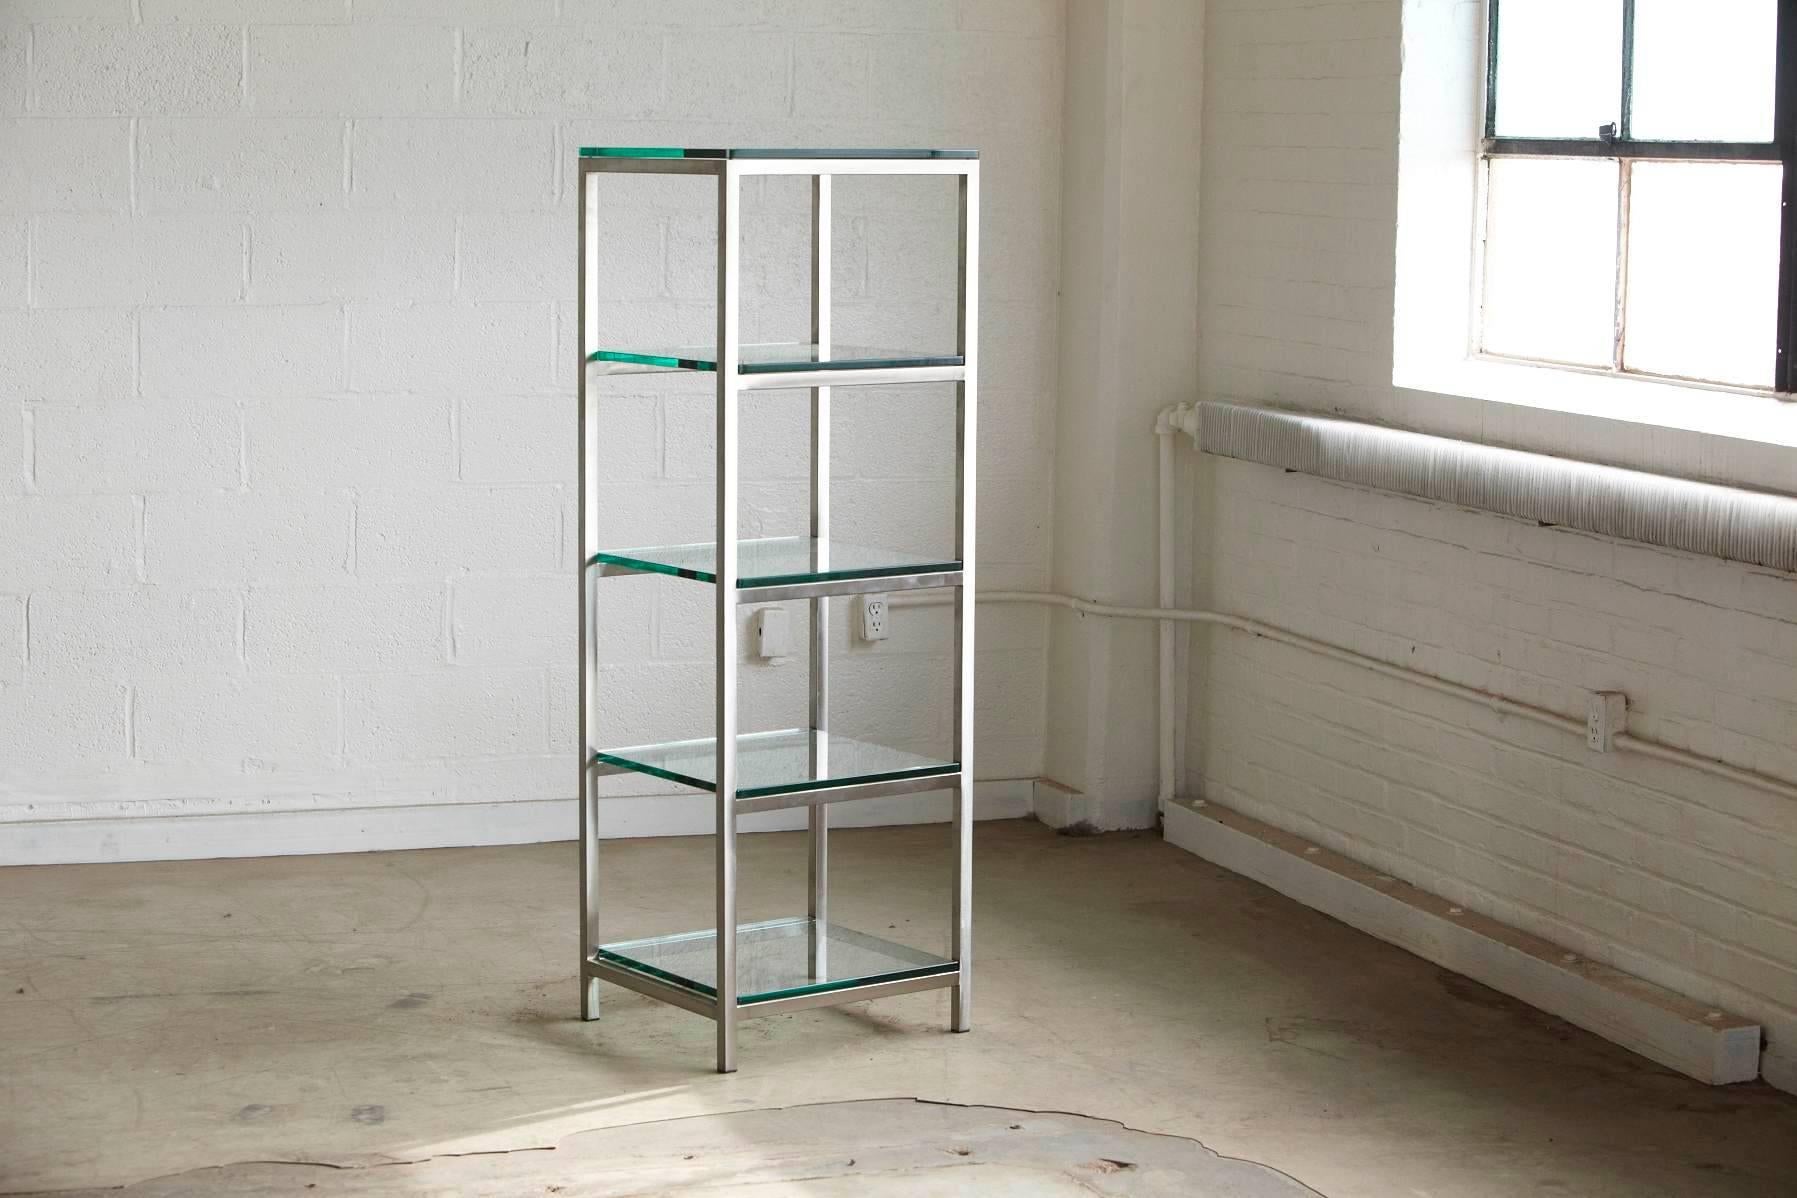 Modern brushed aluminium tube construction with 5 x 3/8 thick glass shelves.
Sturdy and solid appearance caused through the heavy glass shelves.
One of the glass shelves has a minor chip and loss of glass on the corner, which will not be visible